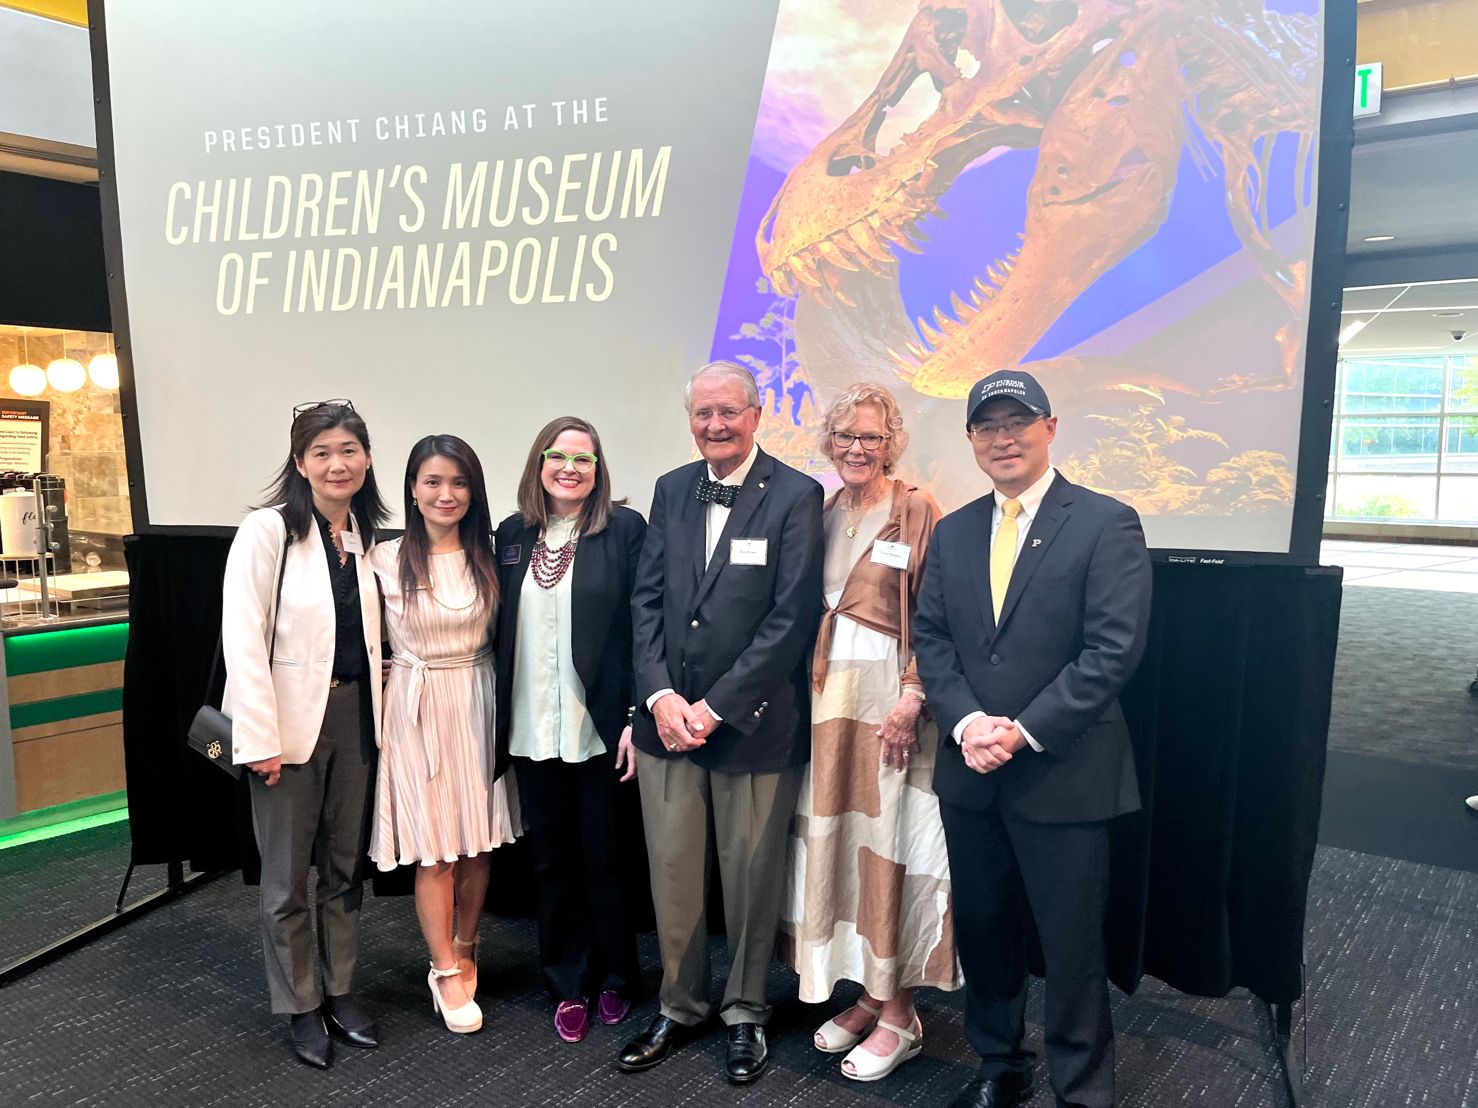 Attended our first Purdue University event at the children’s museum Indianapolis. Special thanks to Bob and Terry Bowen the event sponsor, Jennifer Pace Robinson the museum president and CEO, and our organizing committee/Purdue for life foundation for making this fantastic event possible.